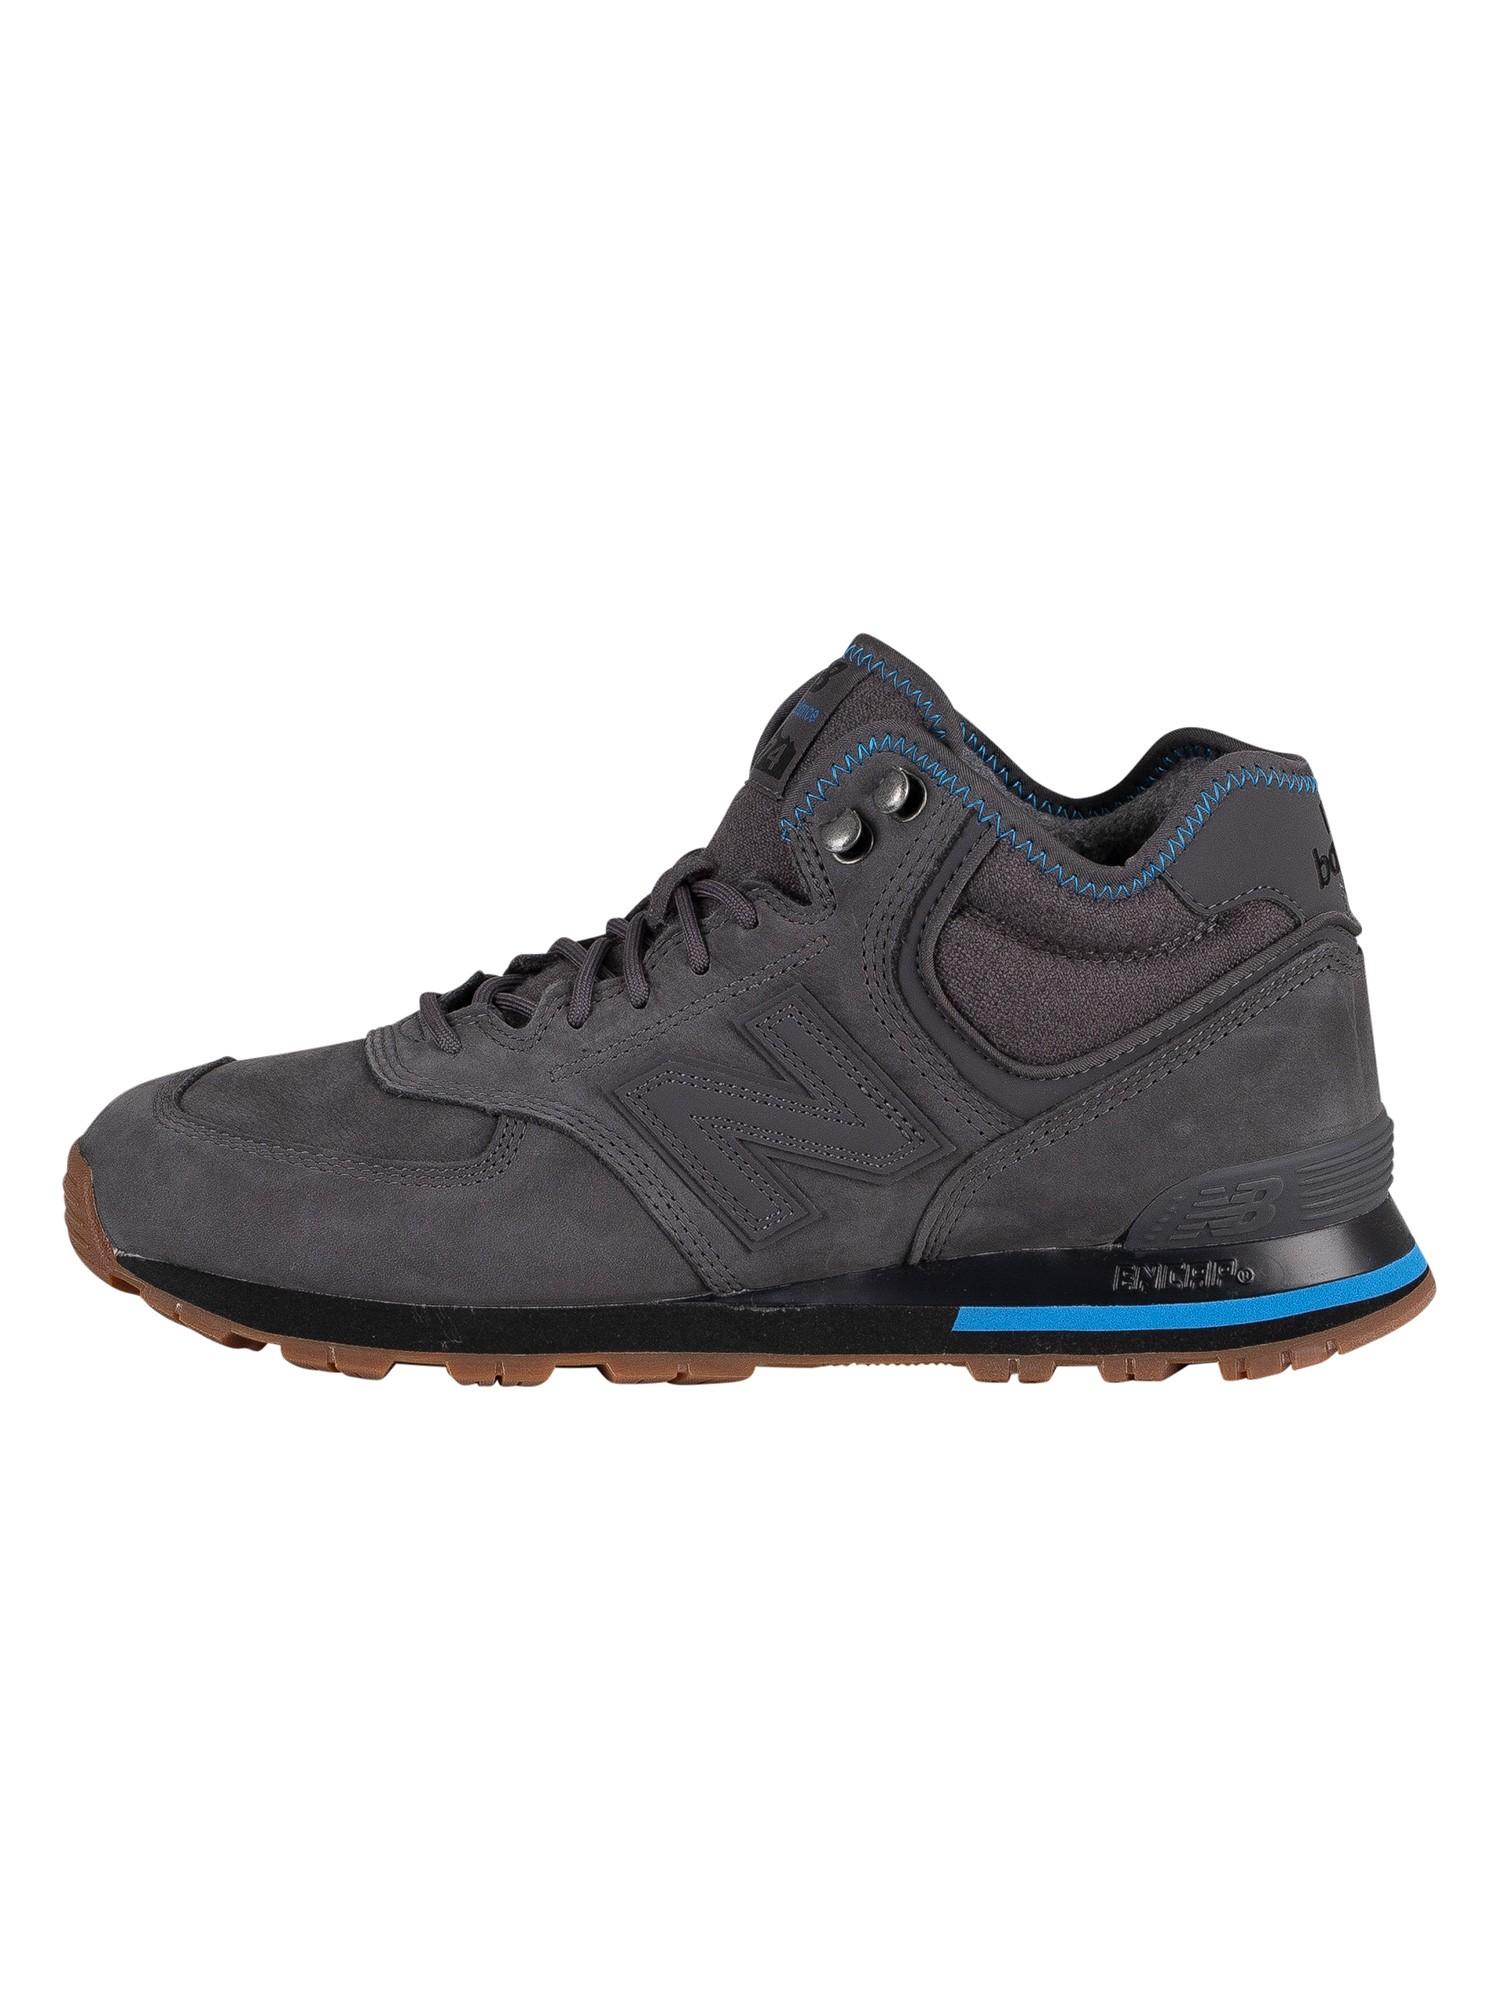 New Balance Suede 574 Mid Trainers in Blue for Men - Lyst